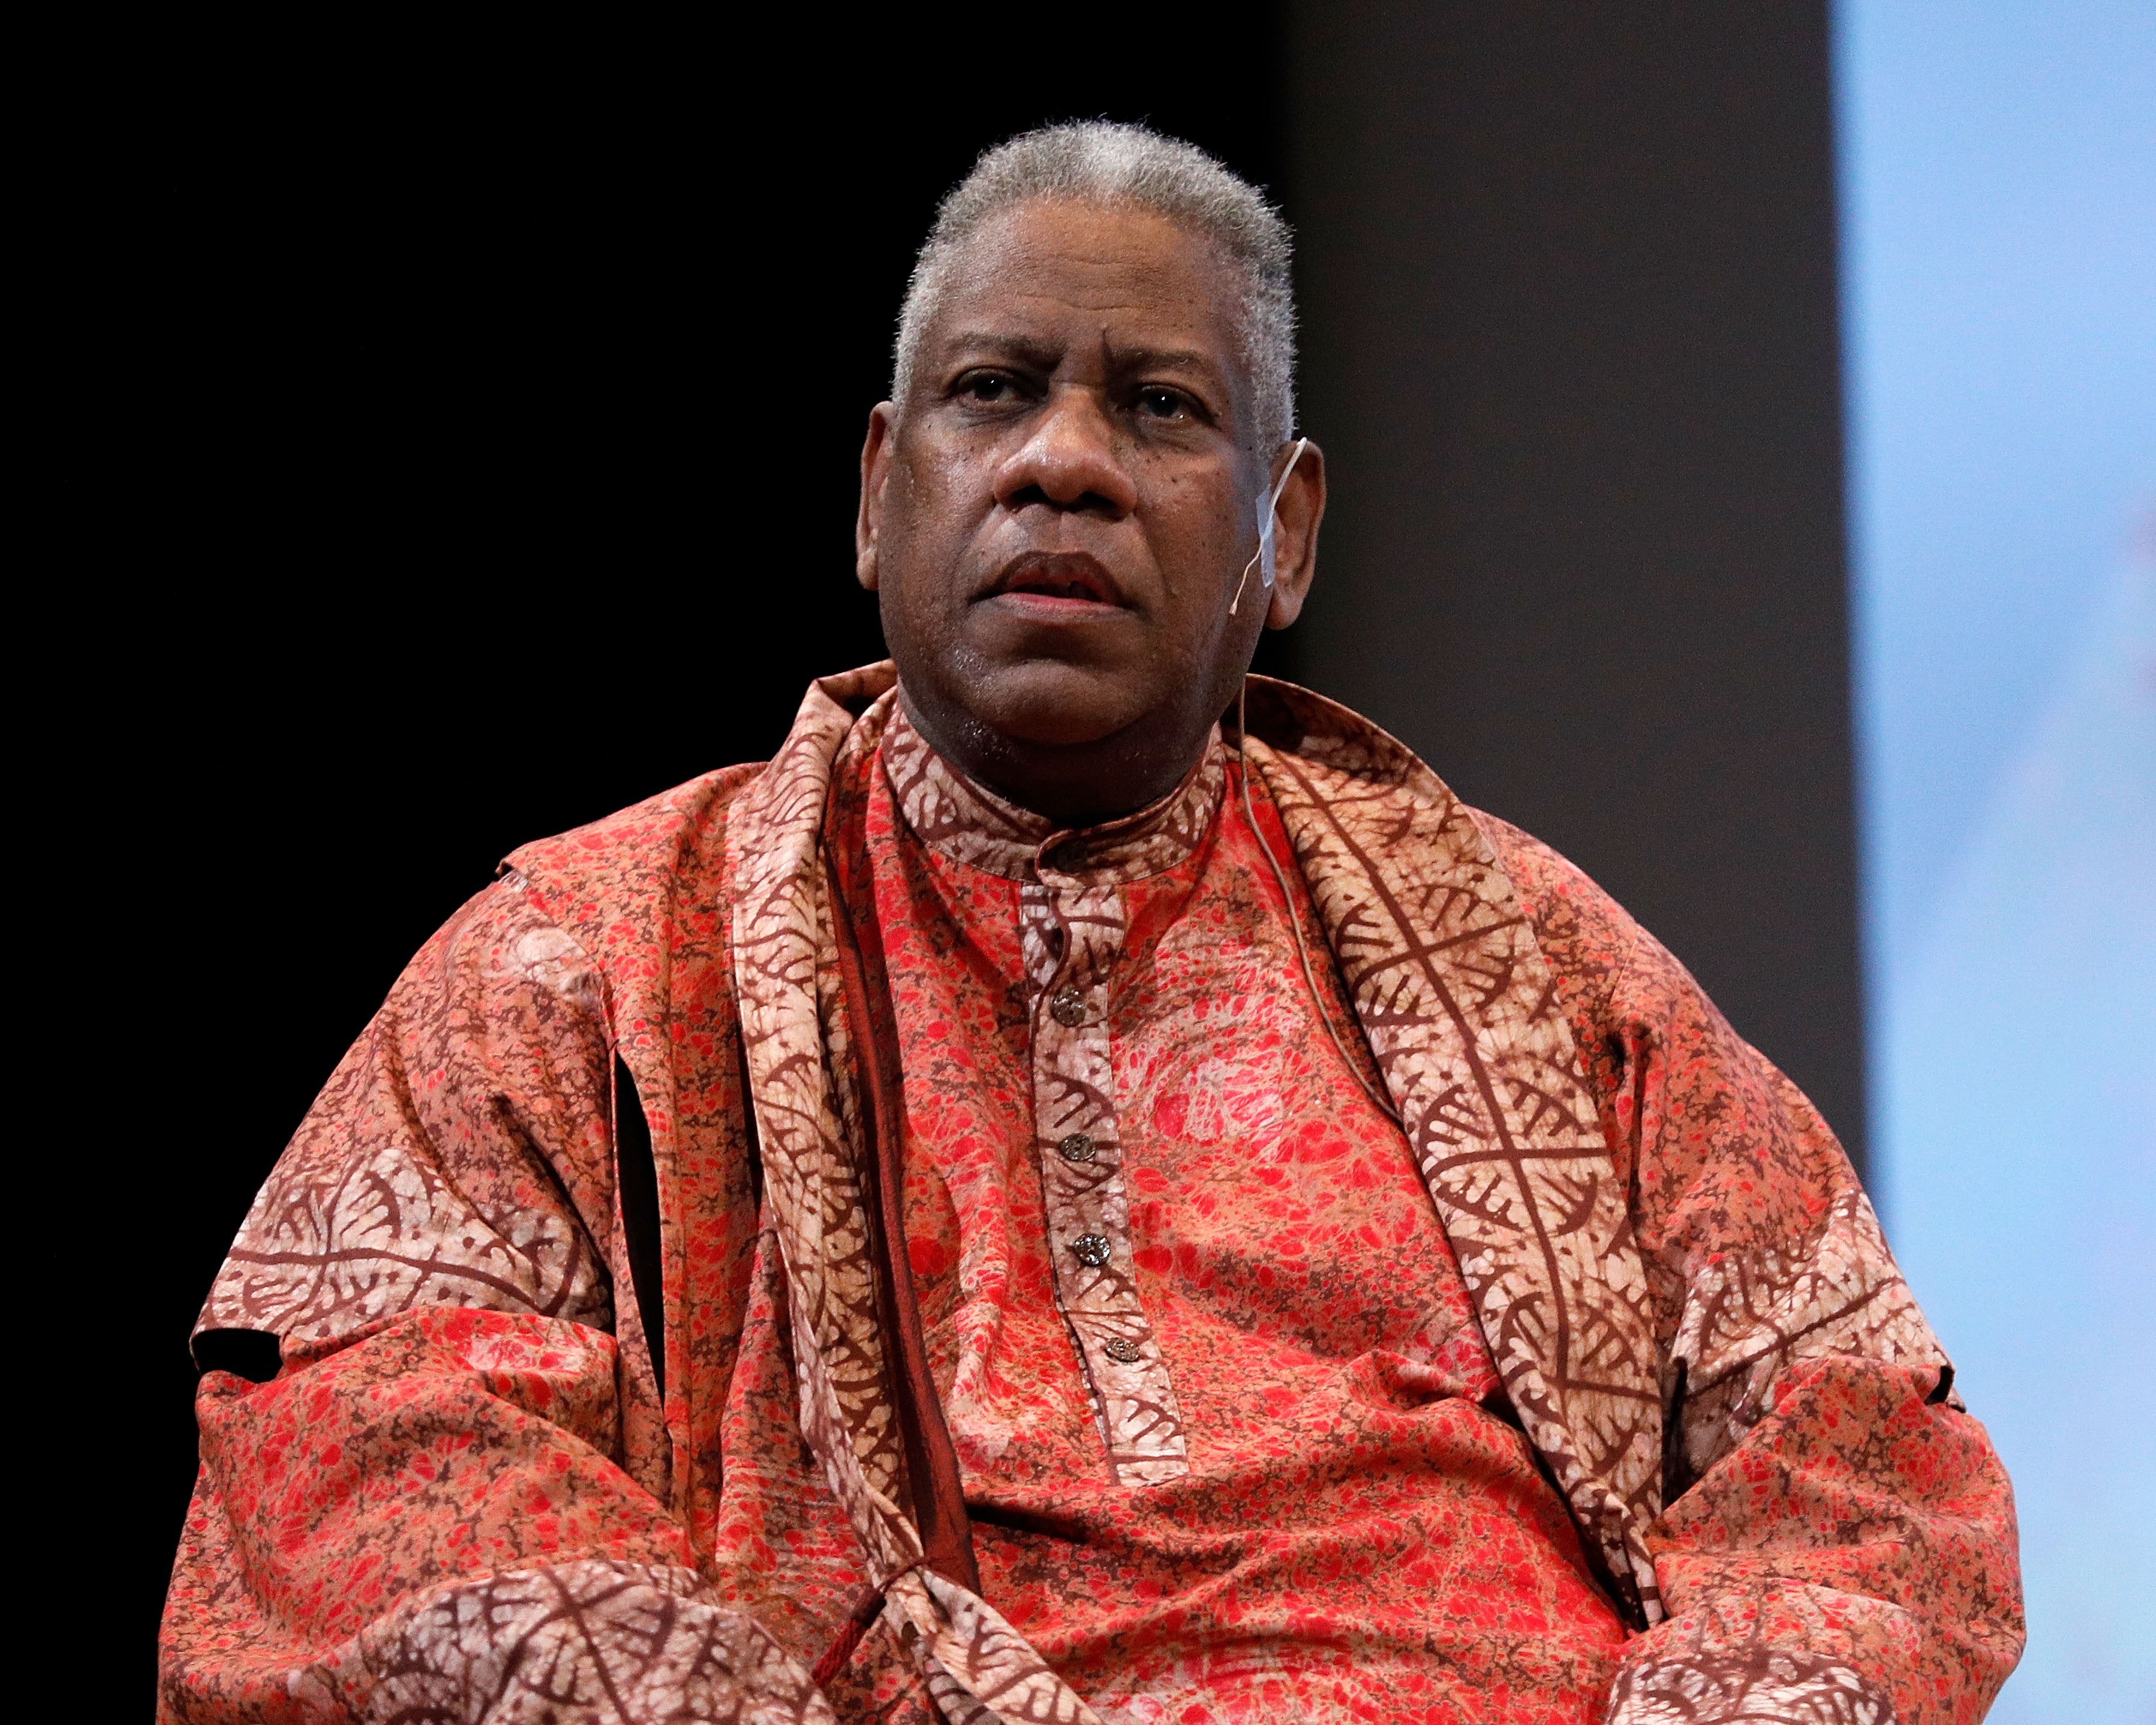 Fashion Icon André Leon Talley Will Be Honored In Upcoming Documentary
